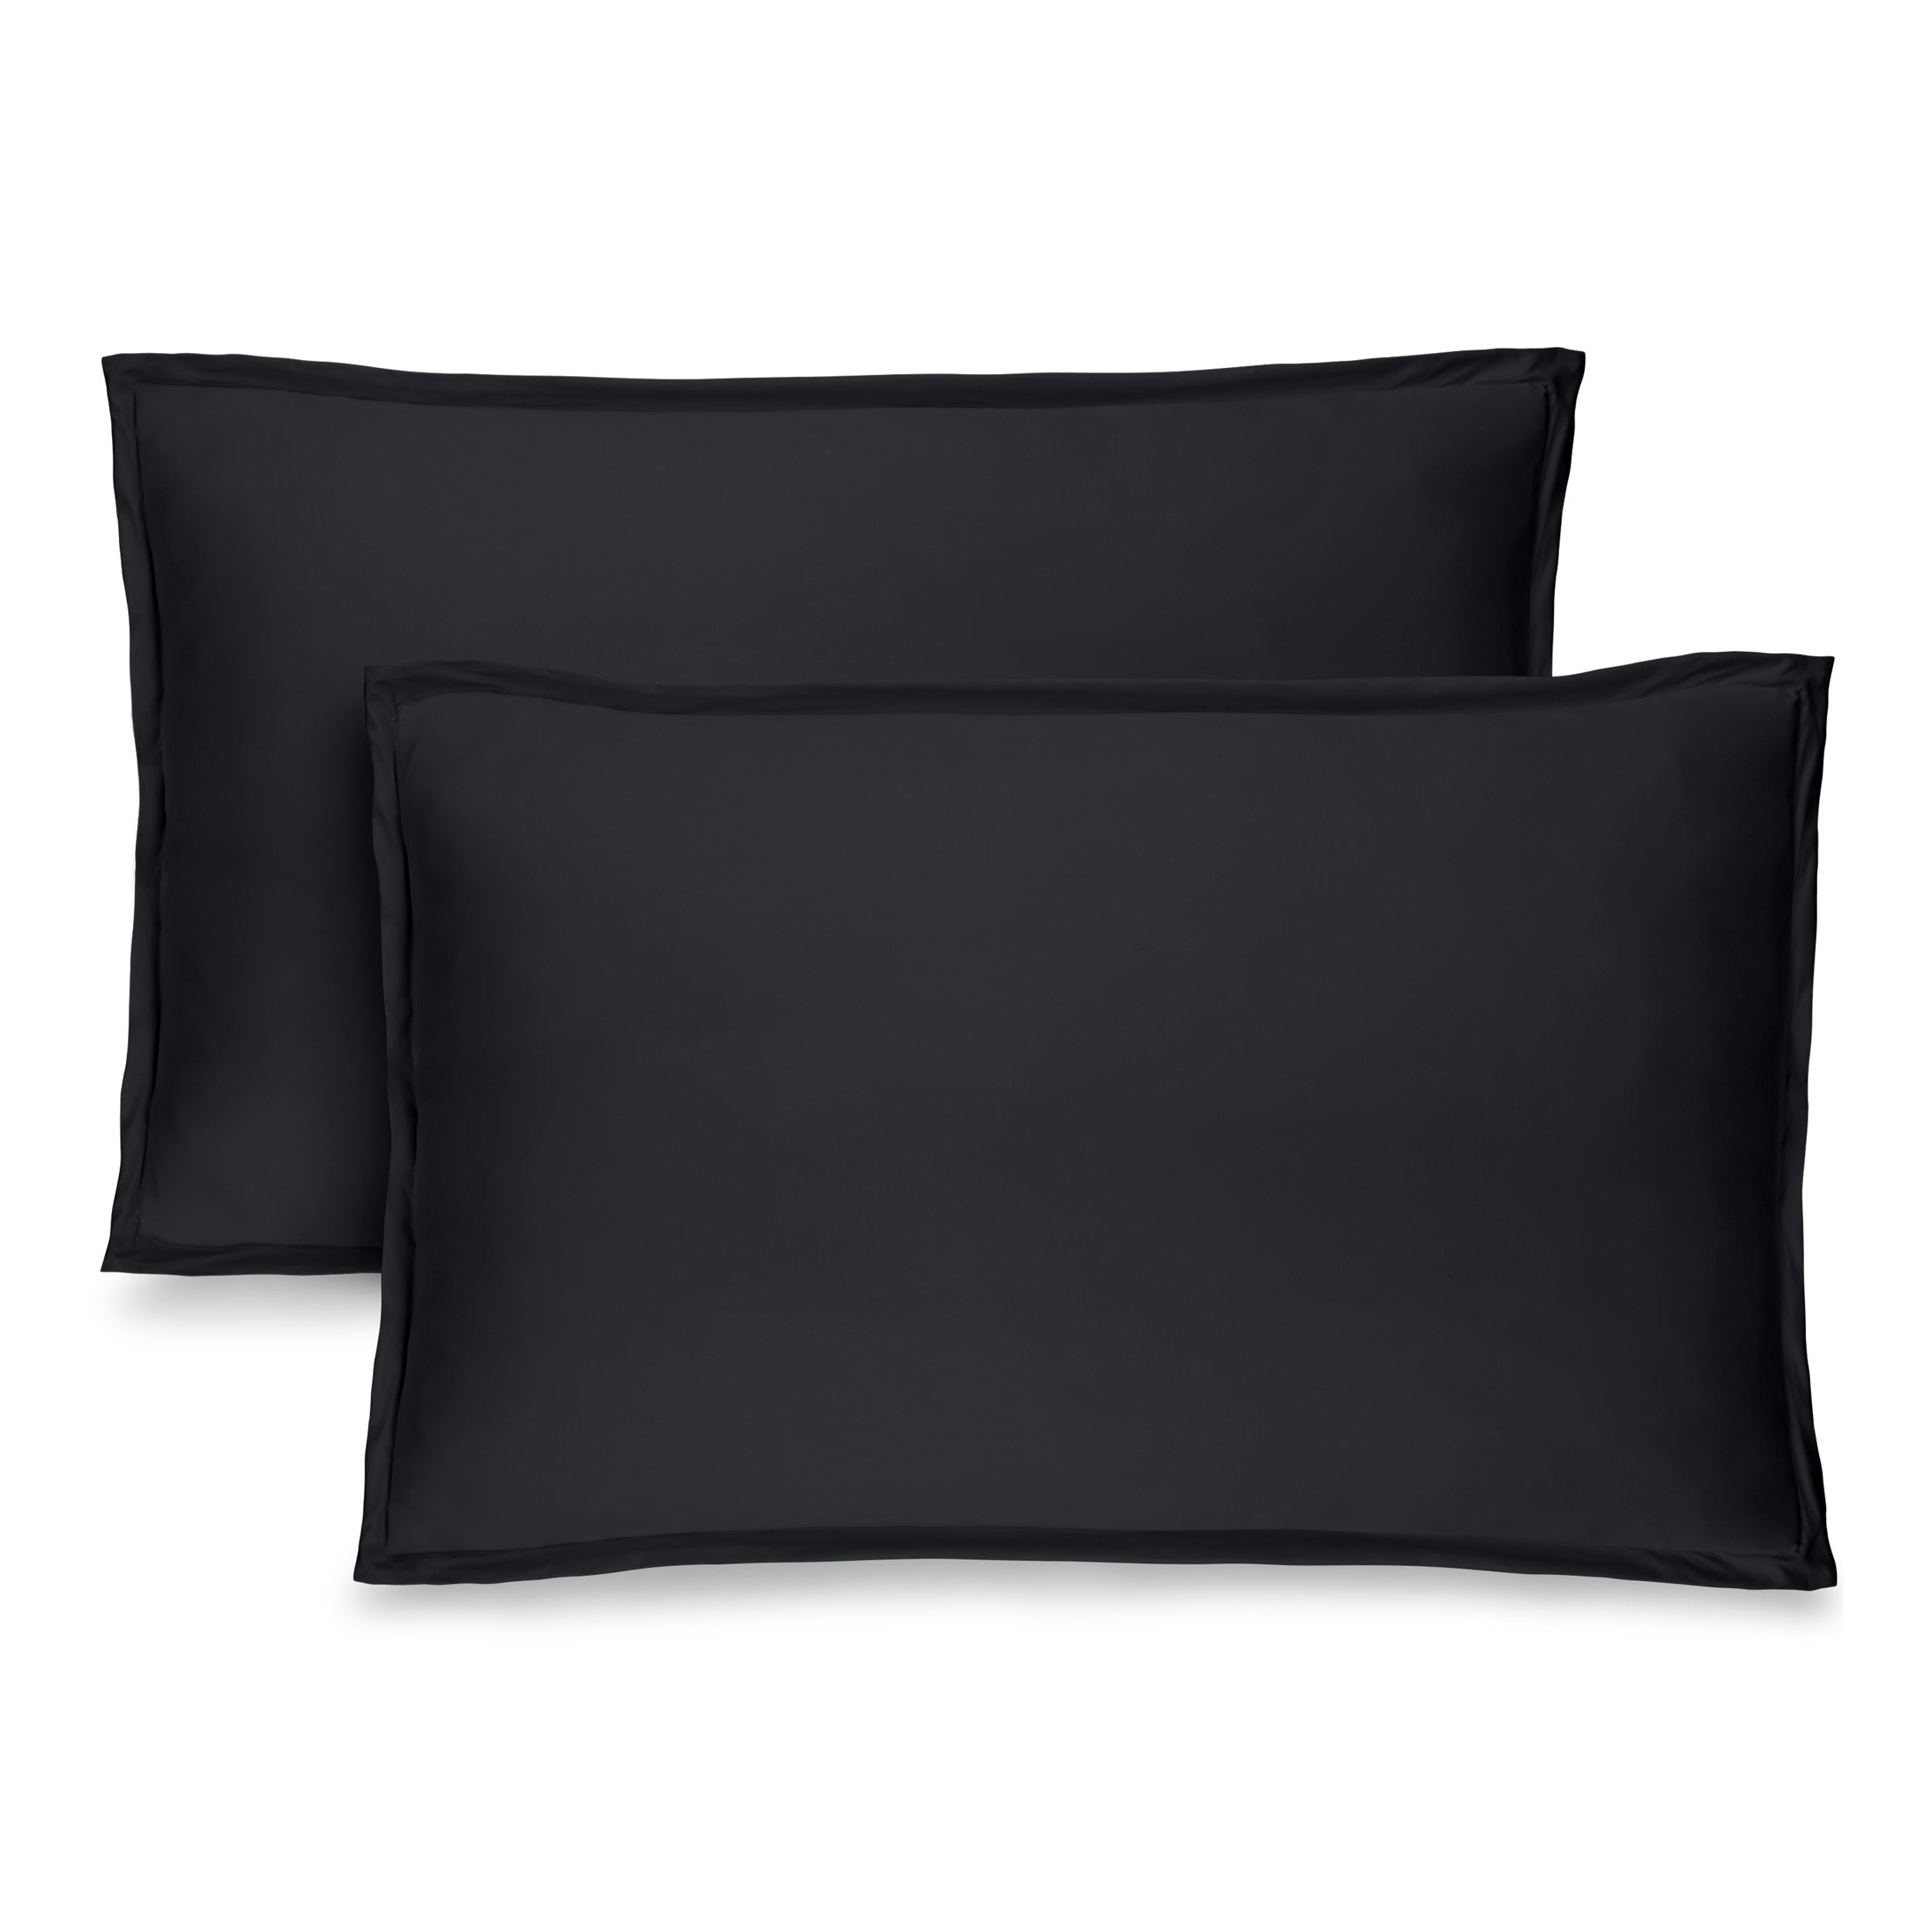 Two black pillow shams on pillows standing up with one behind the other